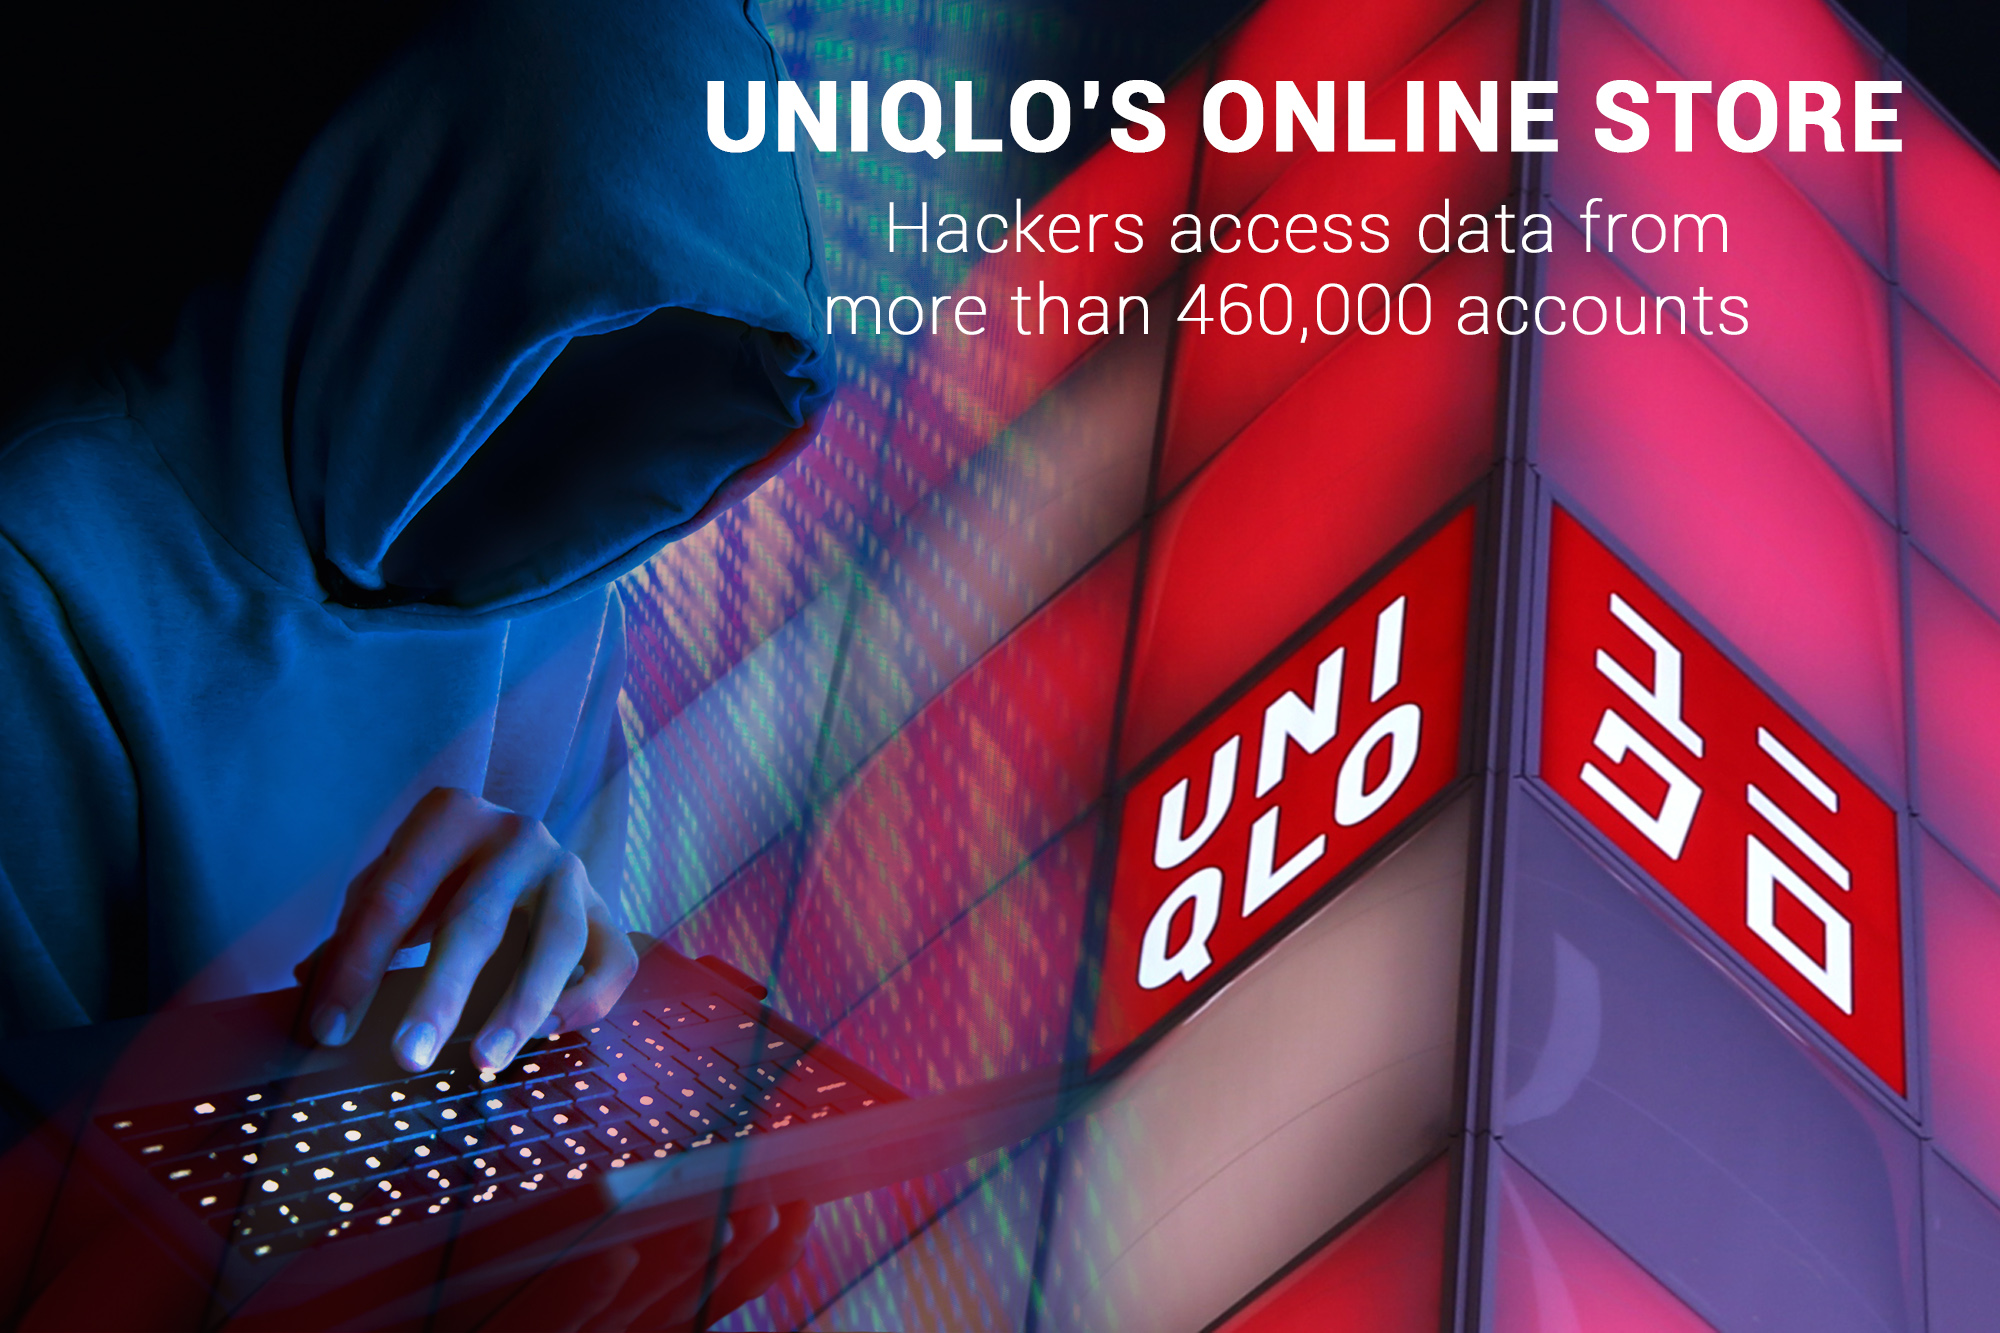 Over 460,000 Uniqlo’s Online Store Accounts Hacked